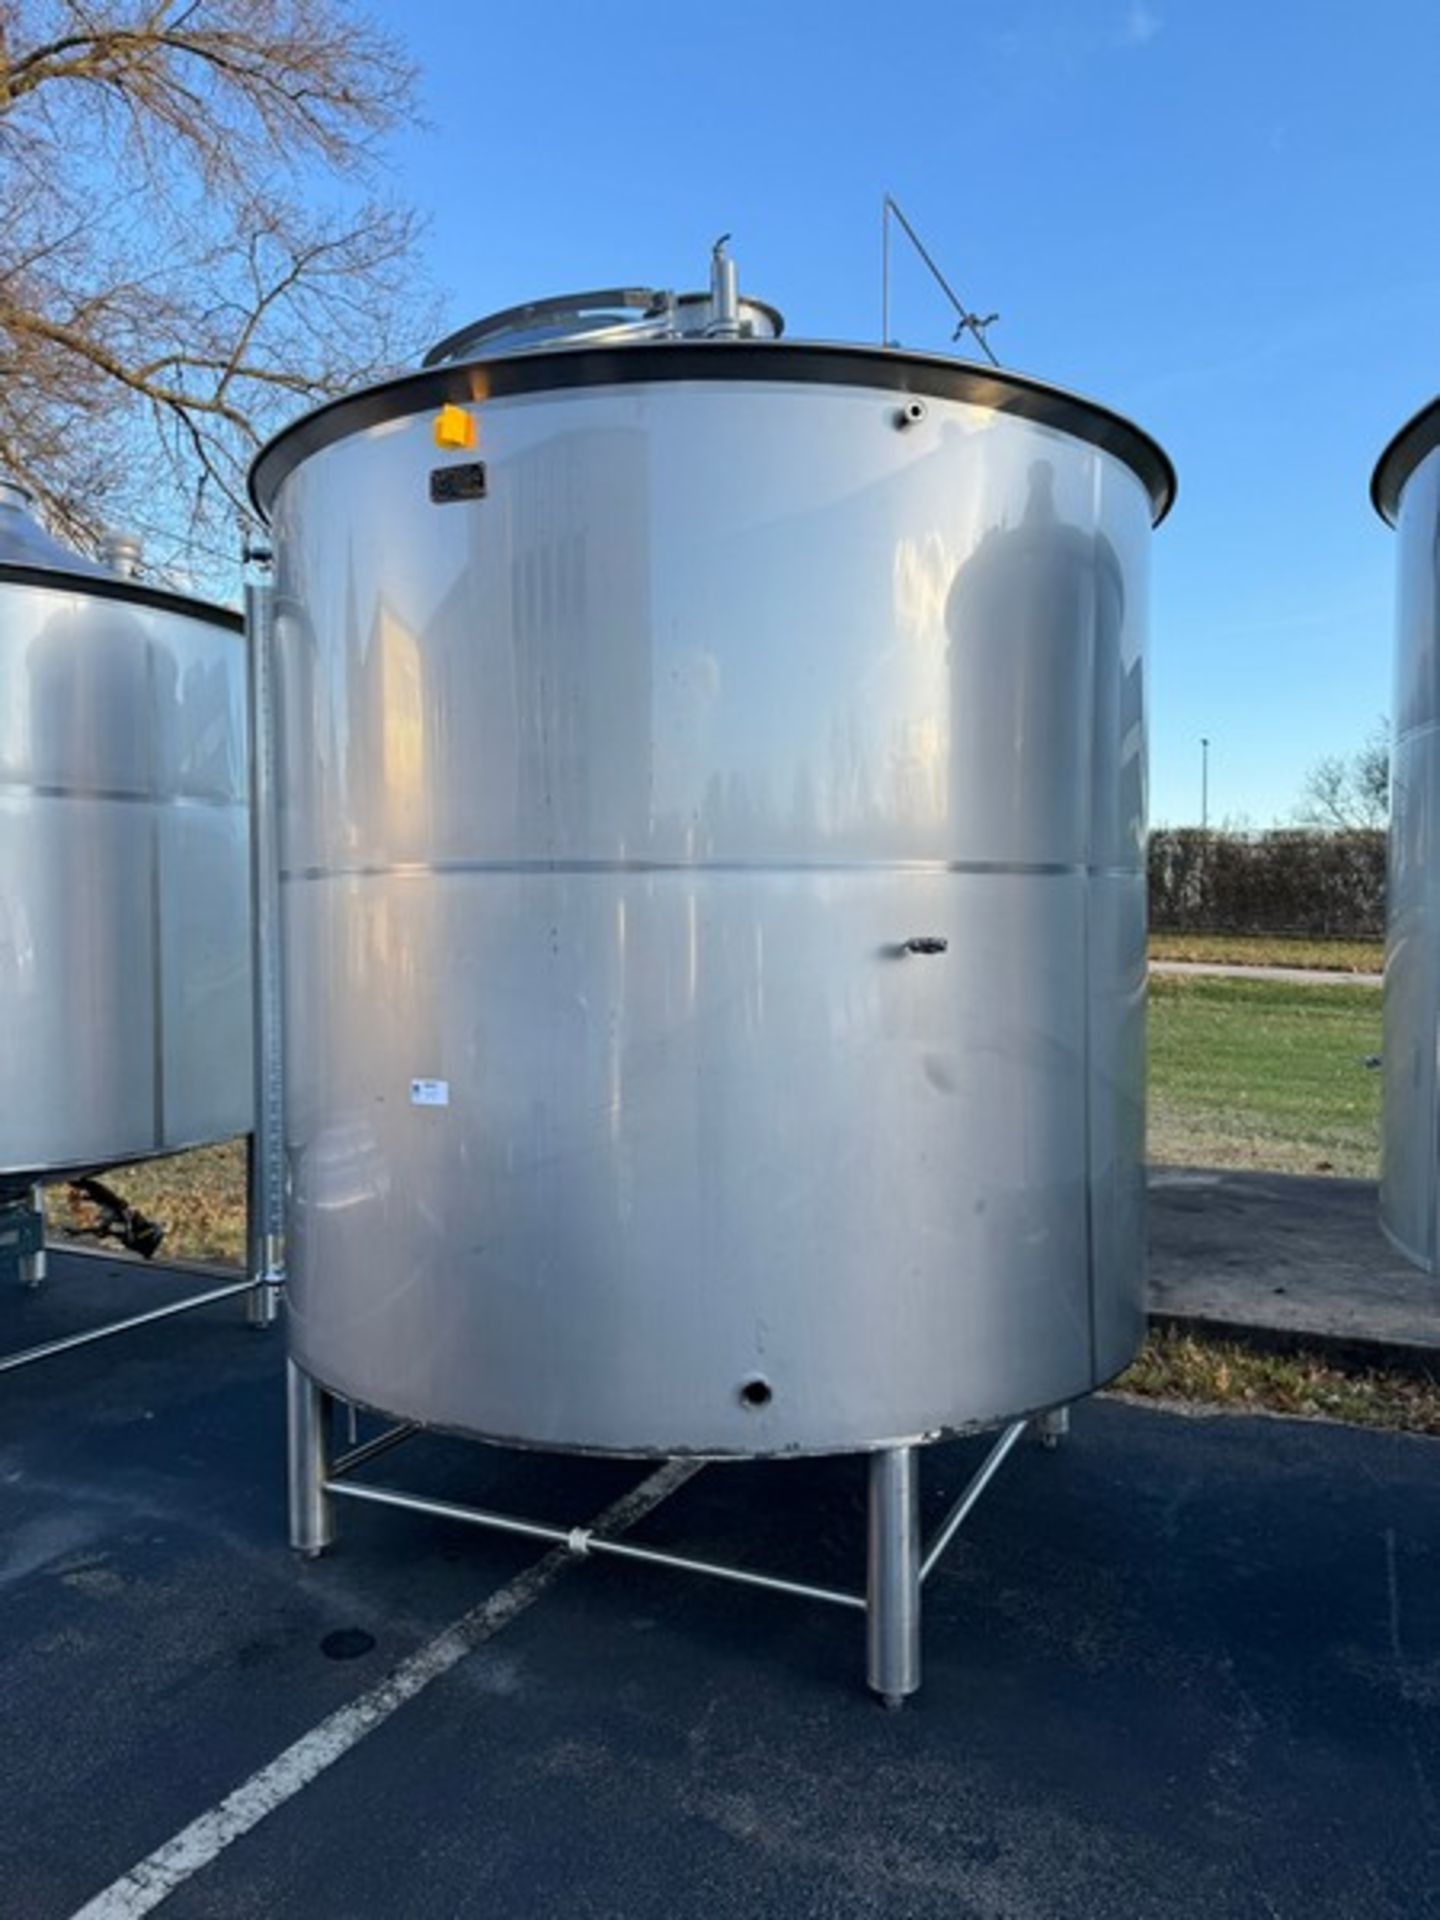 2012 Specific Mechanical Systems 72 BBL S/S Brew Kettle, S/N RMP-136-12, Aprox. 93" Dia., Includes